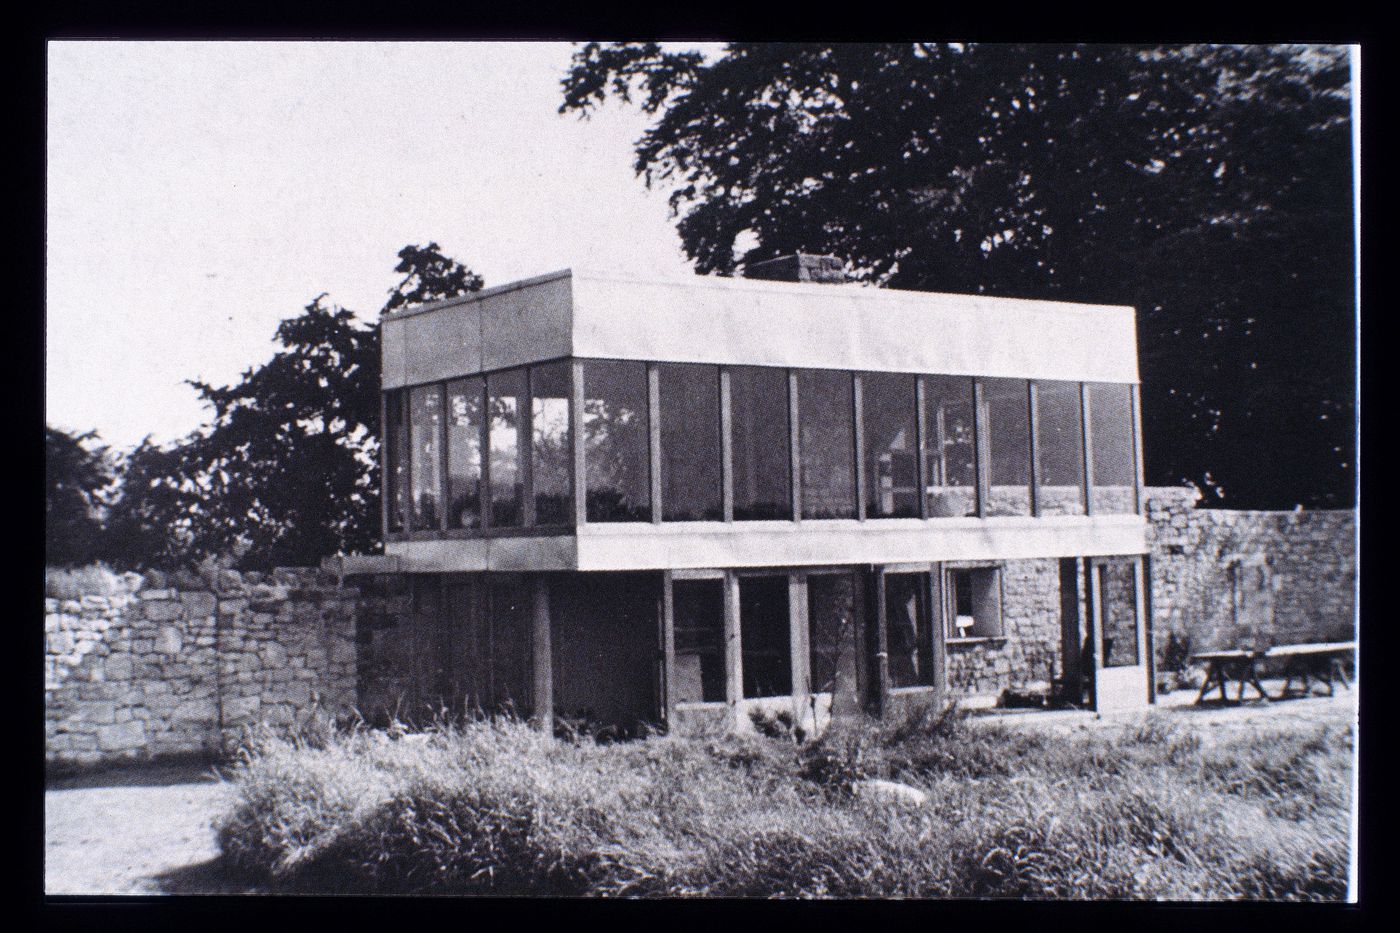 Slide of a photograph of Upper Lawn Pavilion, Wiltshire, by Alison and Peter Smithson